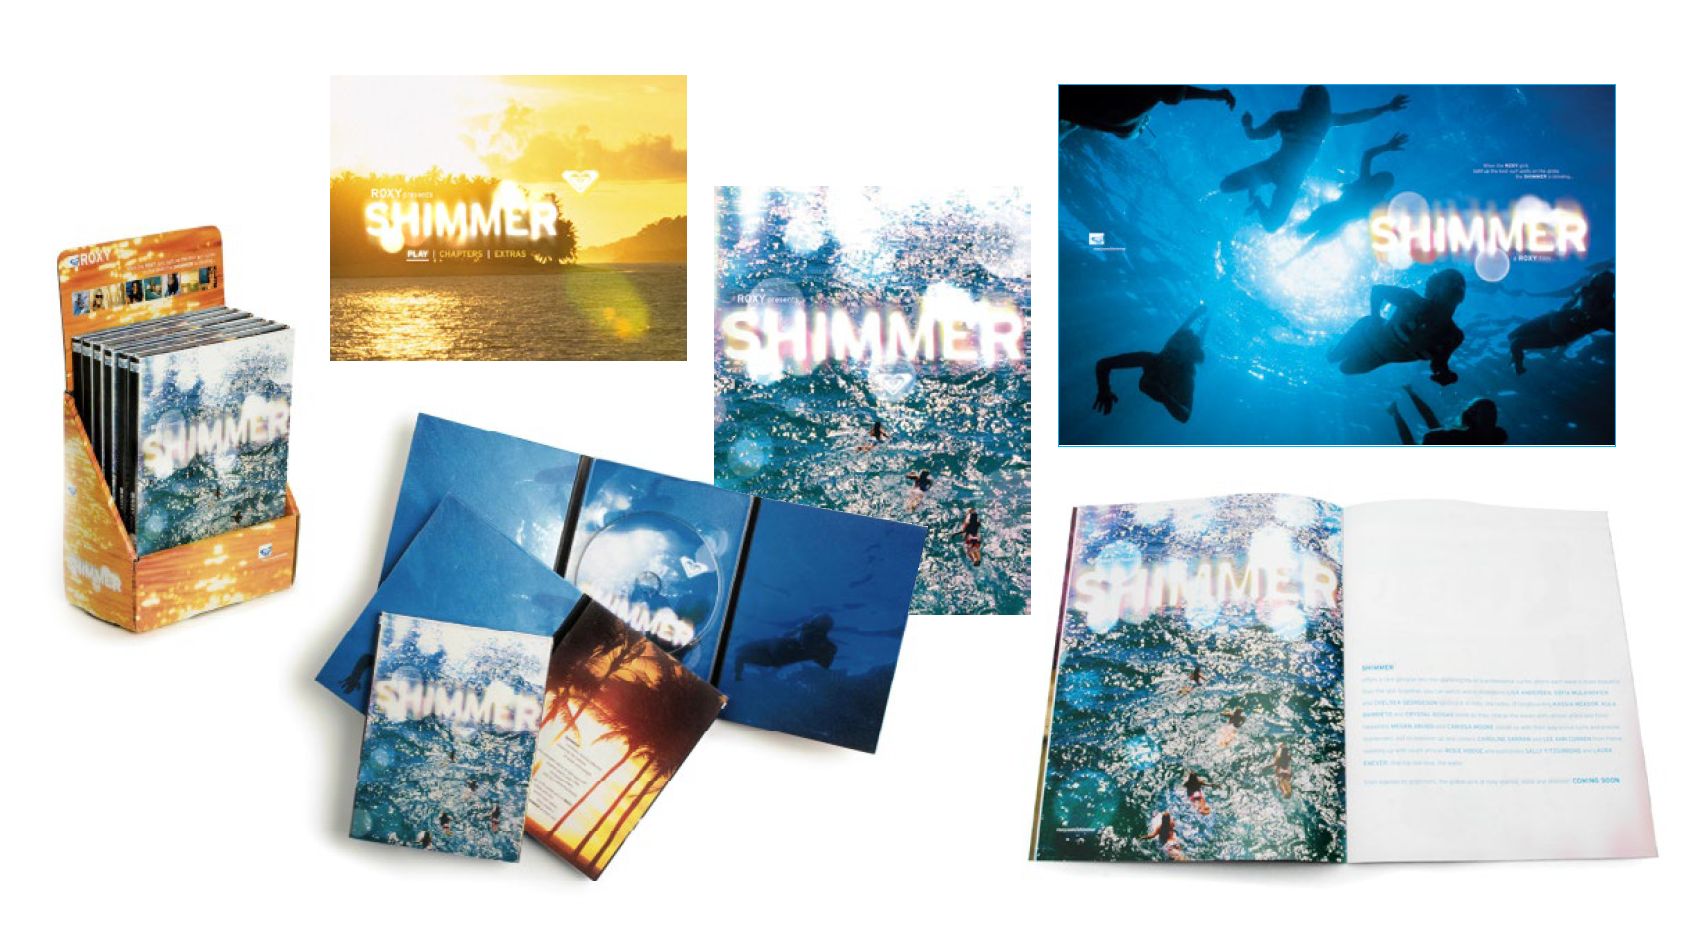 Shimmer Key Art, Packaging, Interactive Menu, Point-of-Purchase Display, and Editorial Collateral